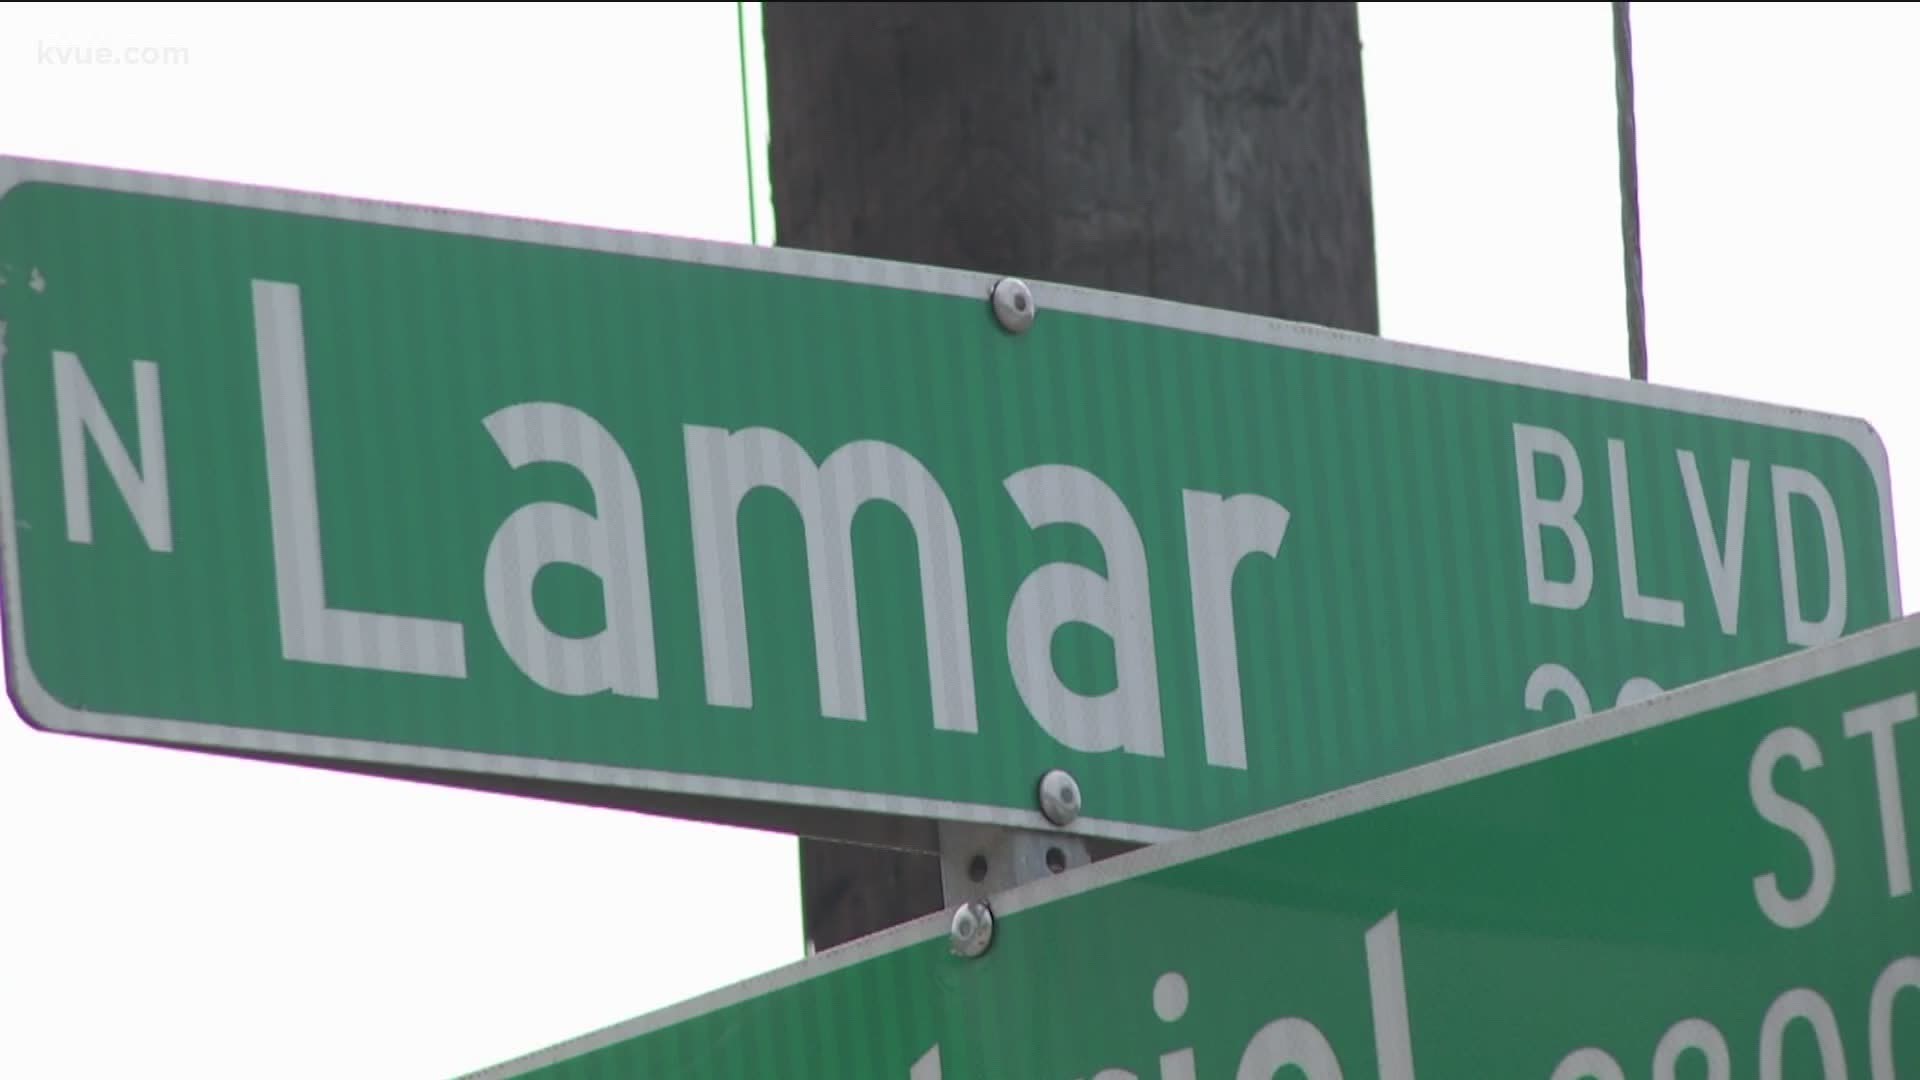 Places and things named after historical figures are getting reexamined across the U.S. and Texas. Now one of Austin's busiest streets is under the microscope.